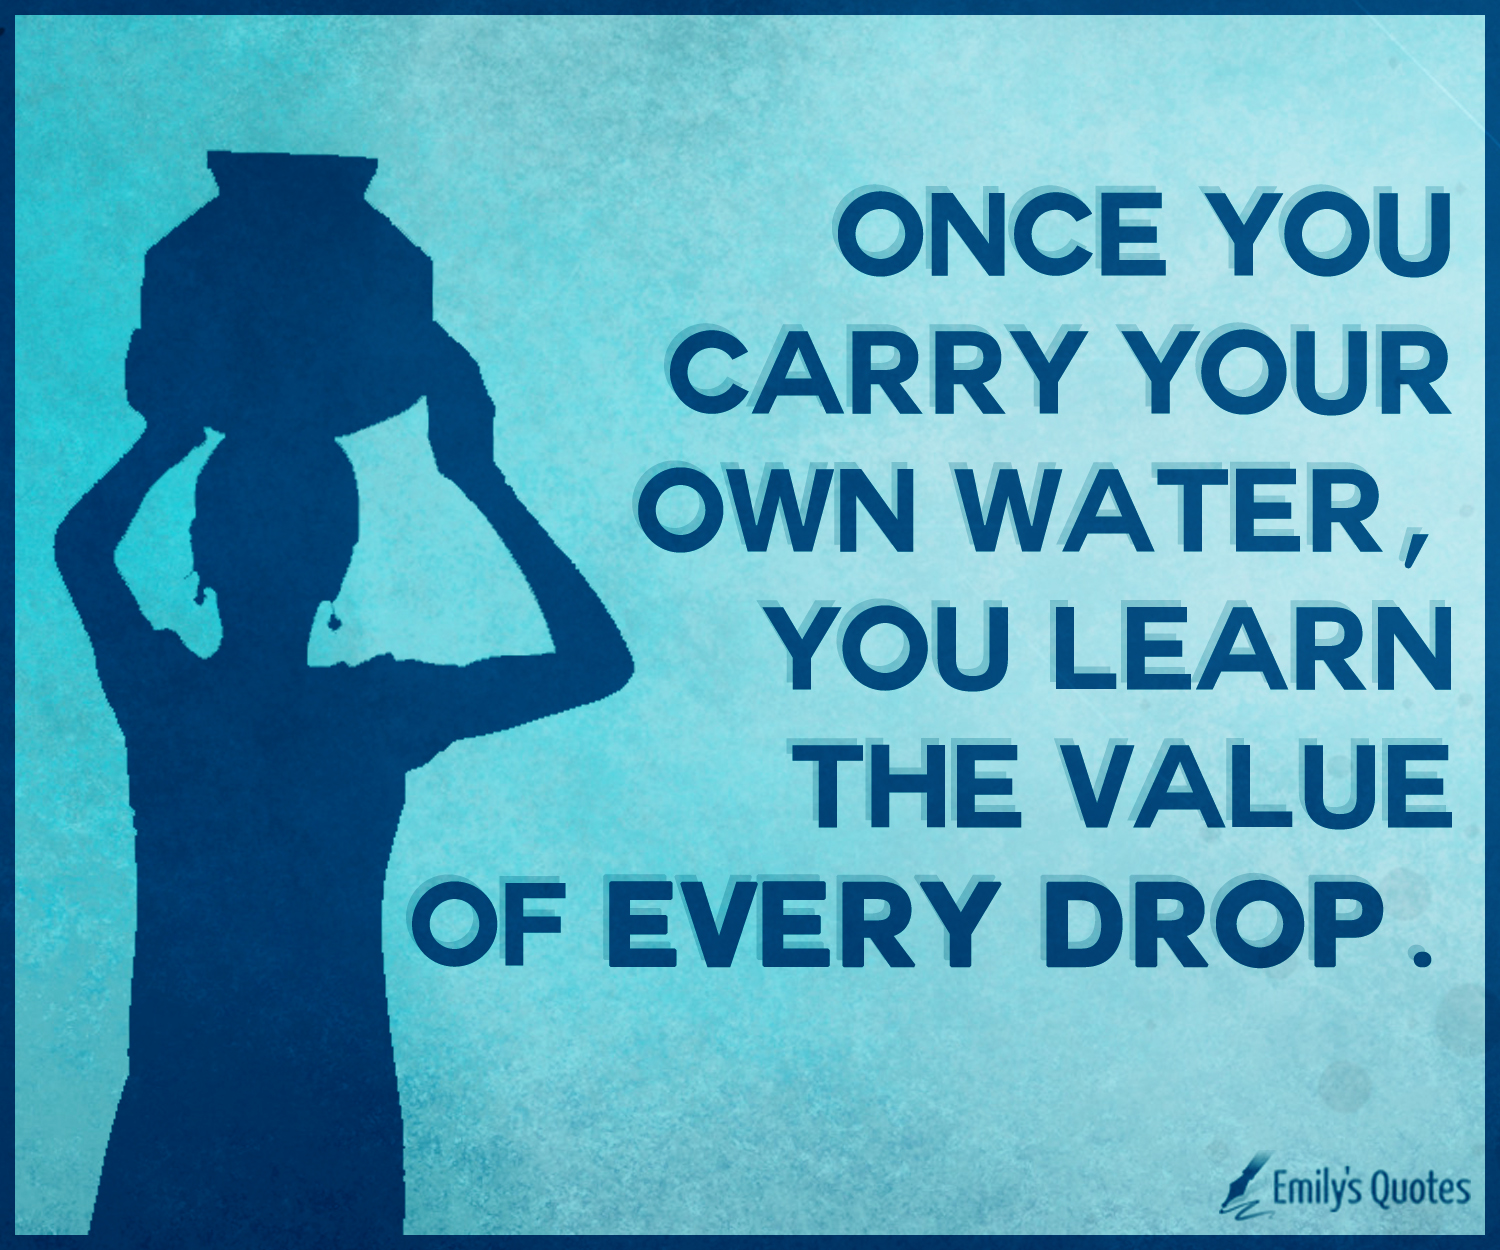 Once you carry your own water, you learn the value of every drop